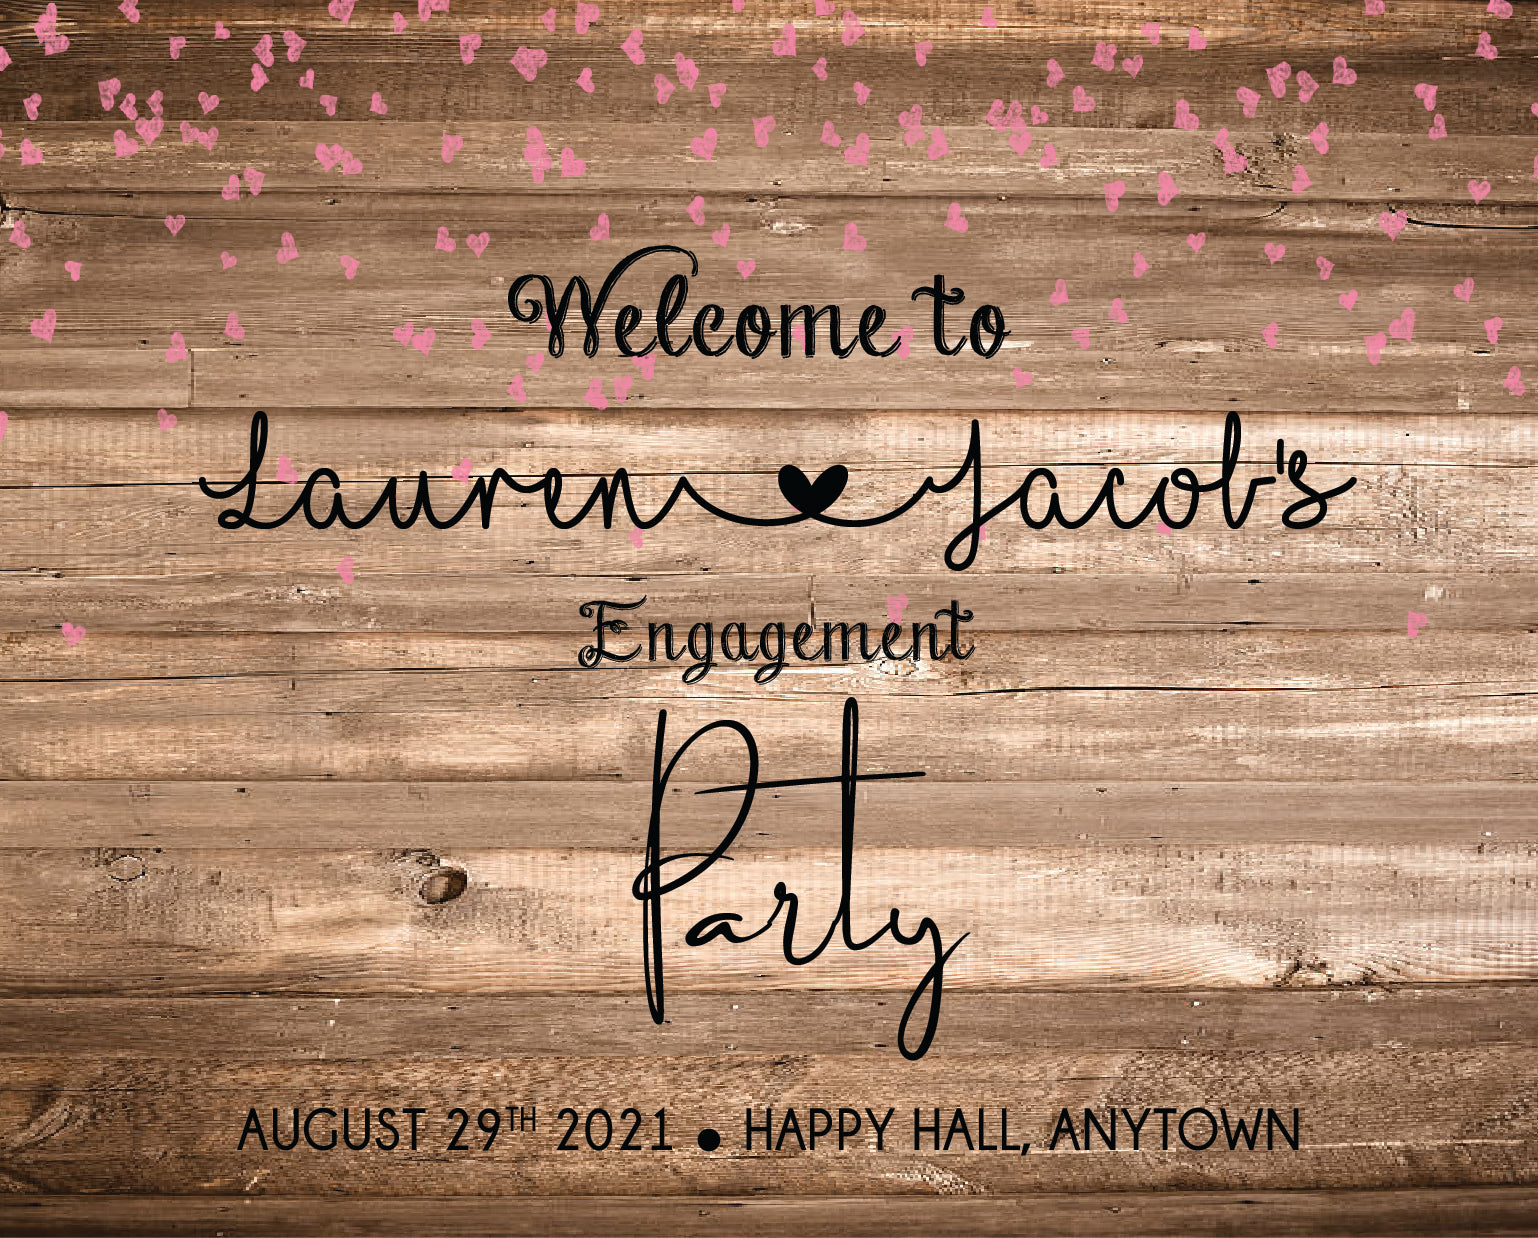 Wood and Hearts Engagement Welcome Party Sign - Invitetique